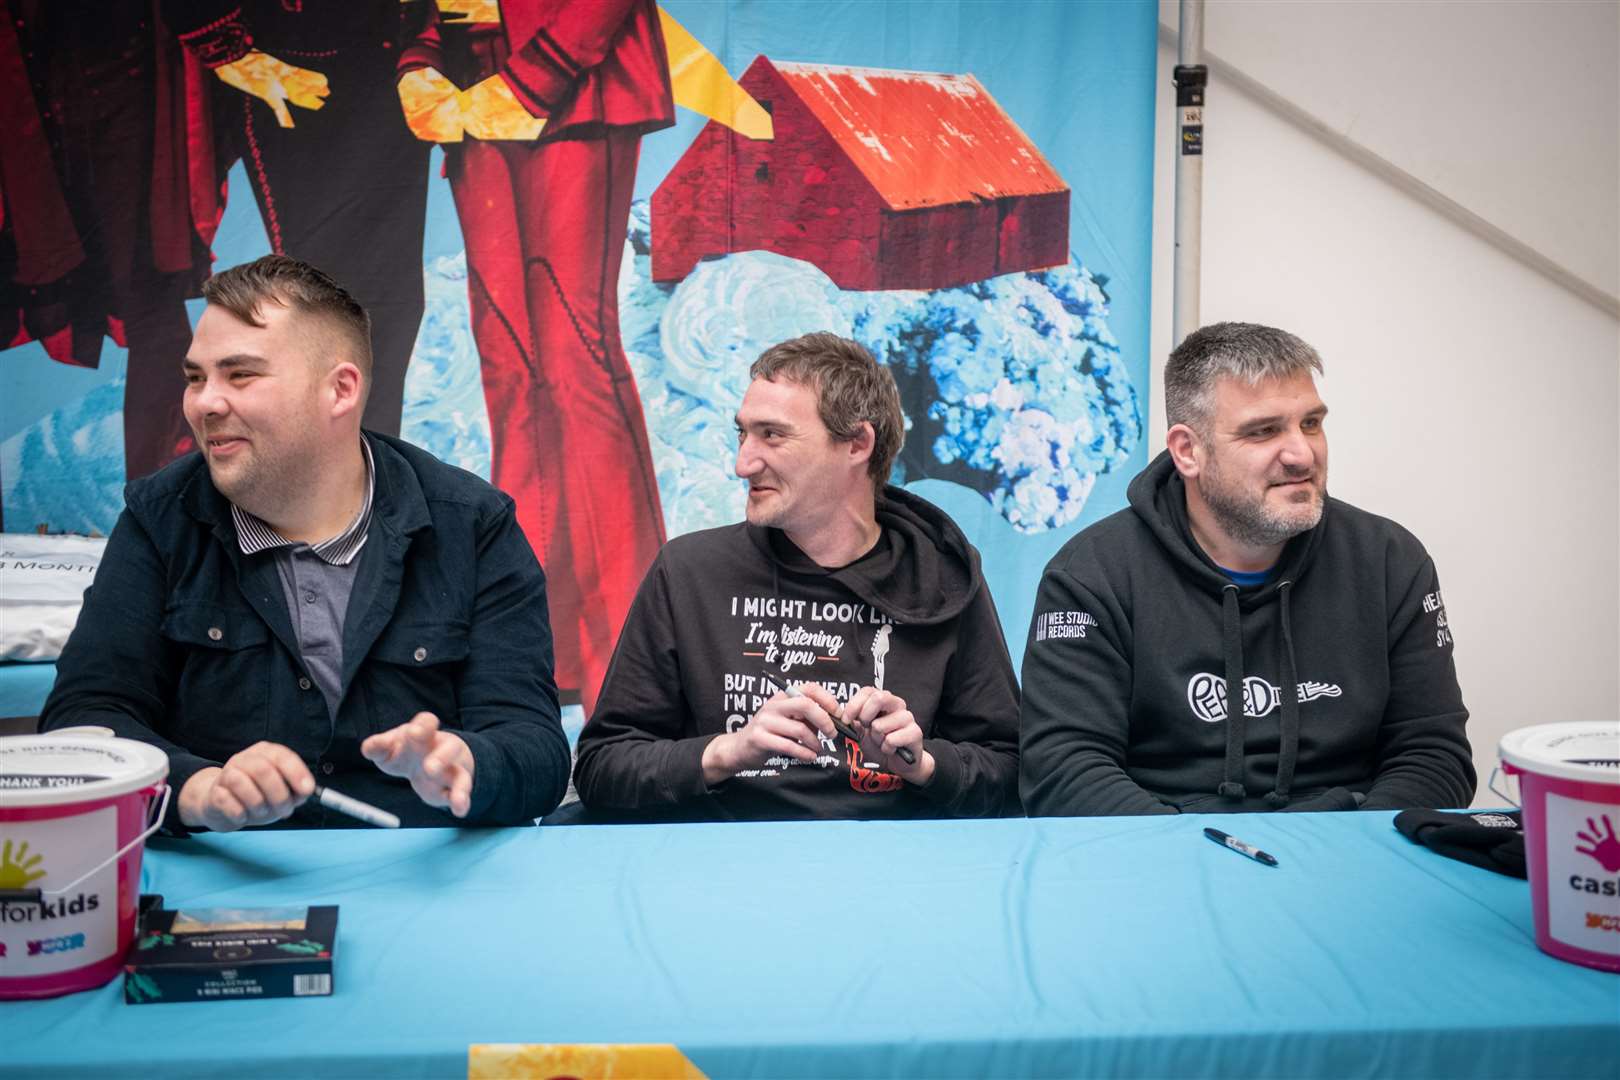 Peat & Diesel – from left – Ully, Boydie and Innes get to meet fans in the Eastgate Centre on Sunday after their free outdoor gig. Picture: Callum MackayP